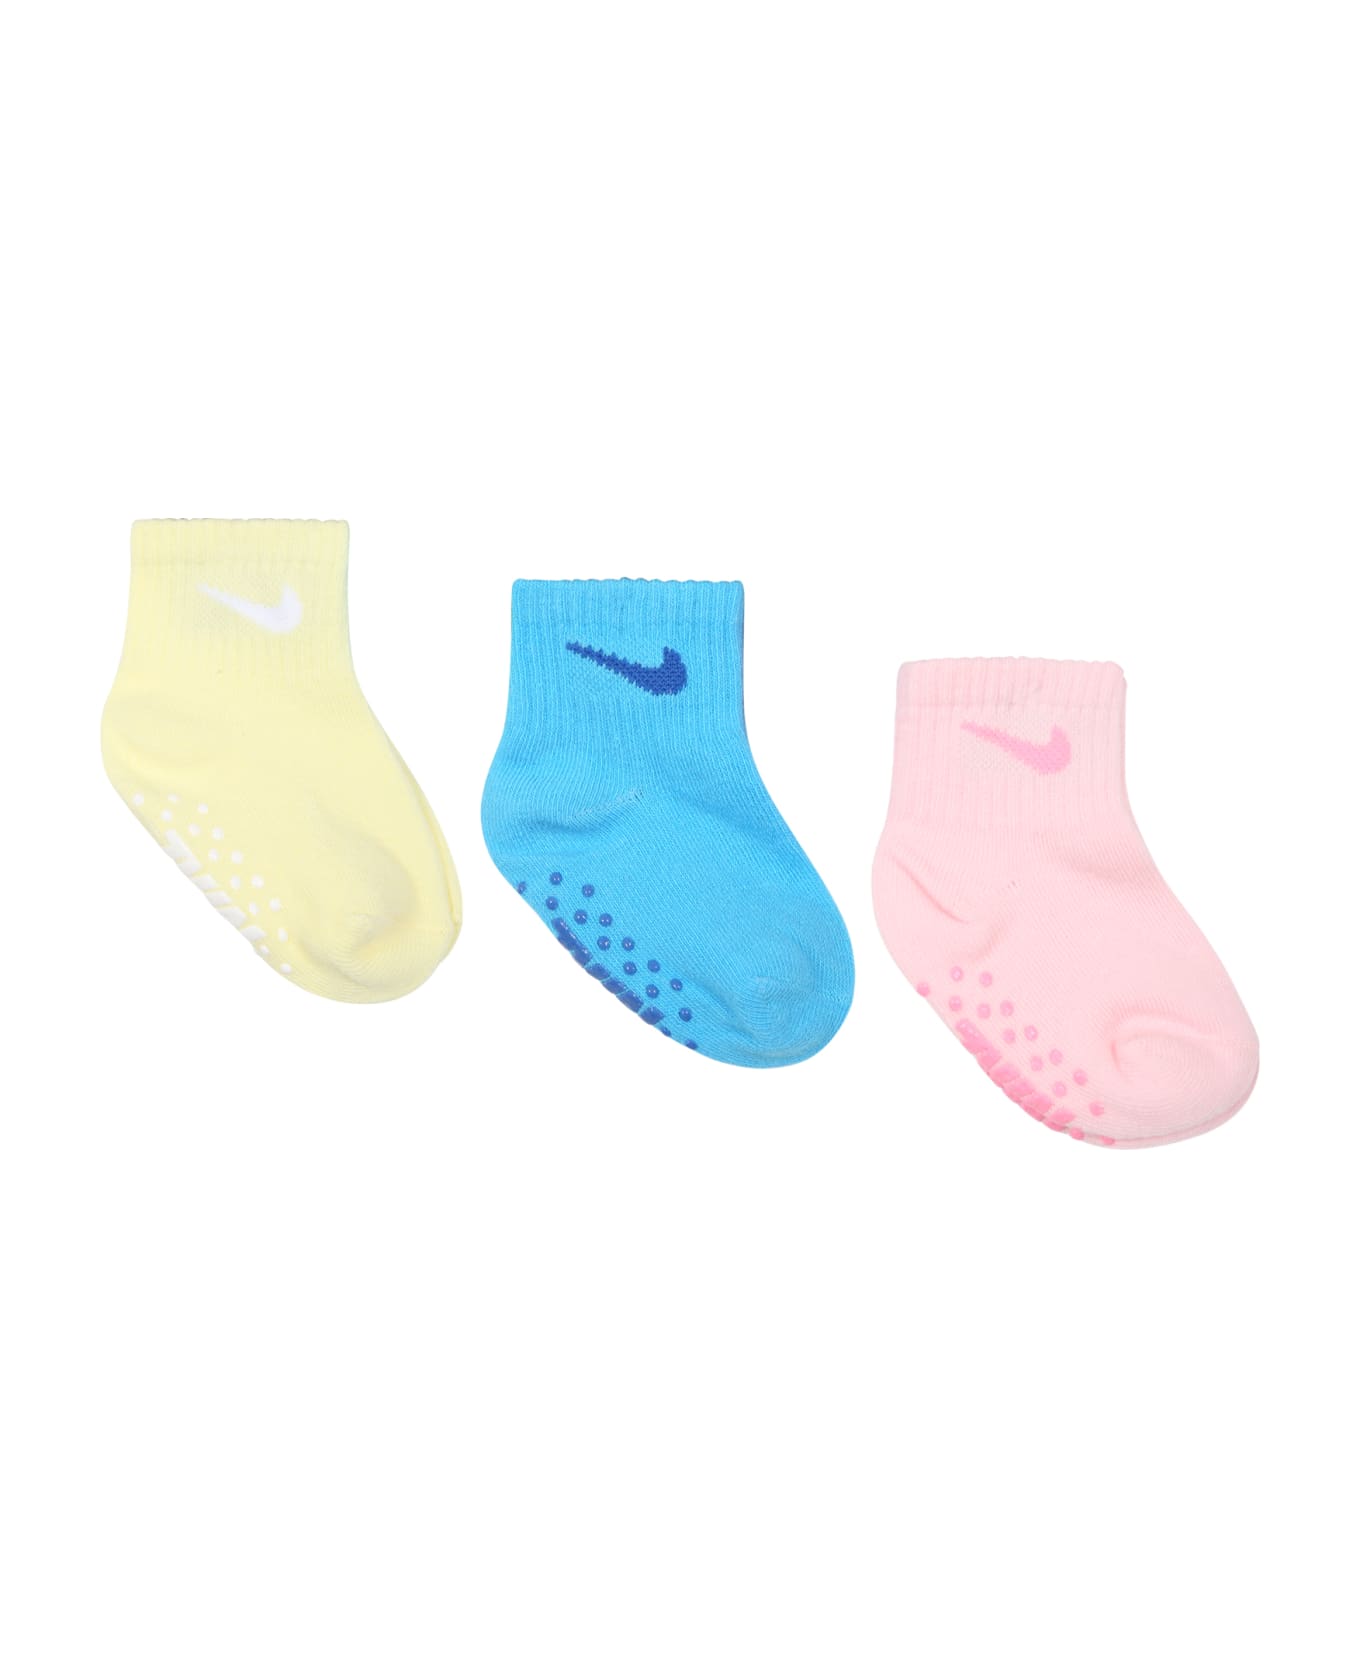 Nike Multioclro Set For Baby Kids With Iconic Swoosh - Multicolor